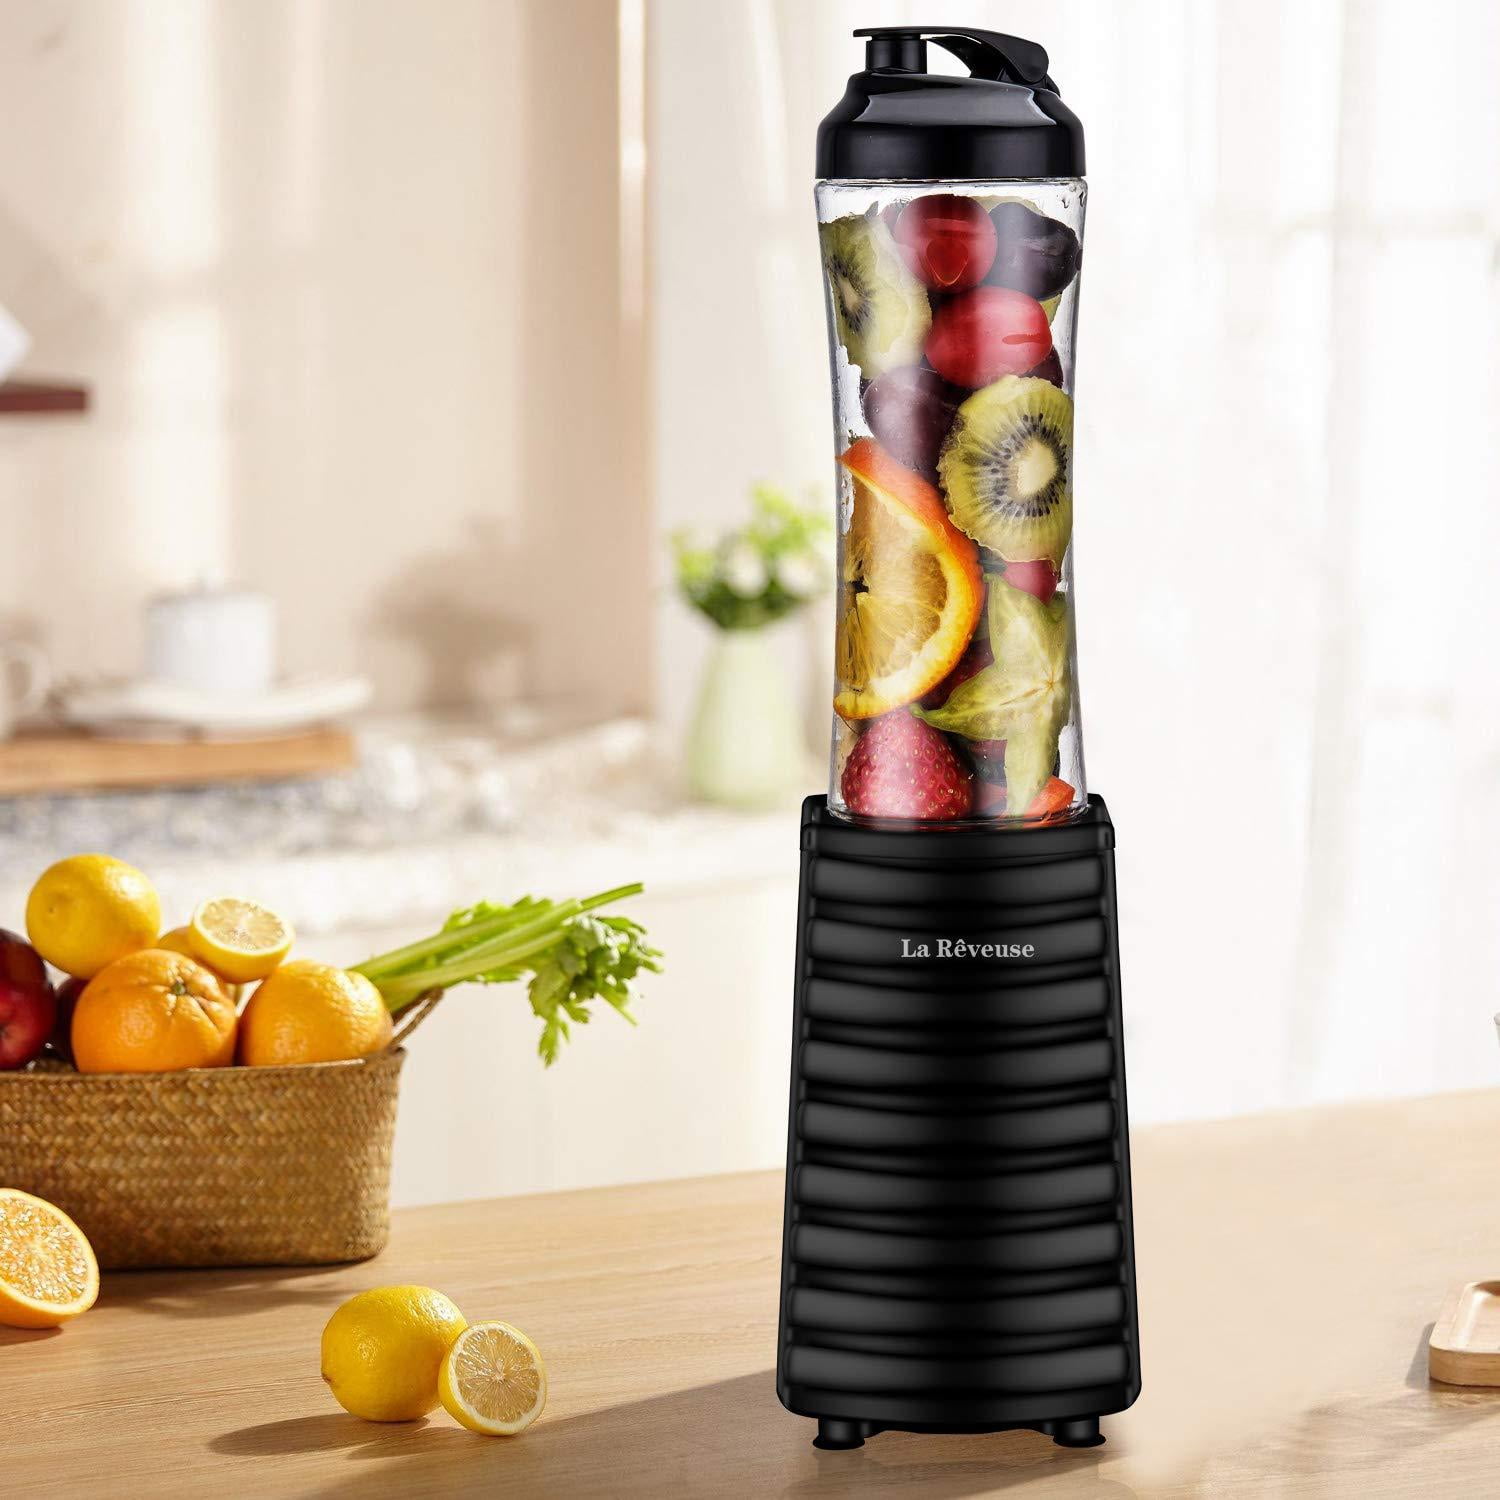  La Reveuse Smoothies Blender Personal Size 300 Watts